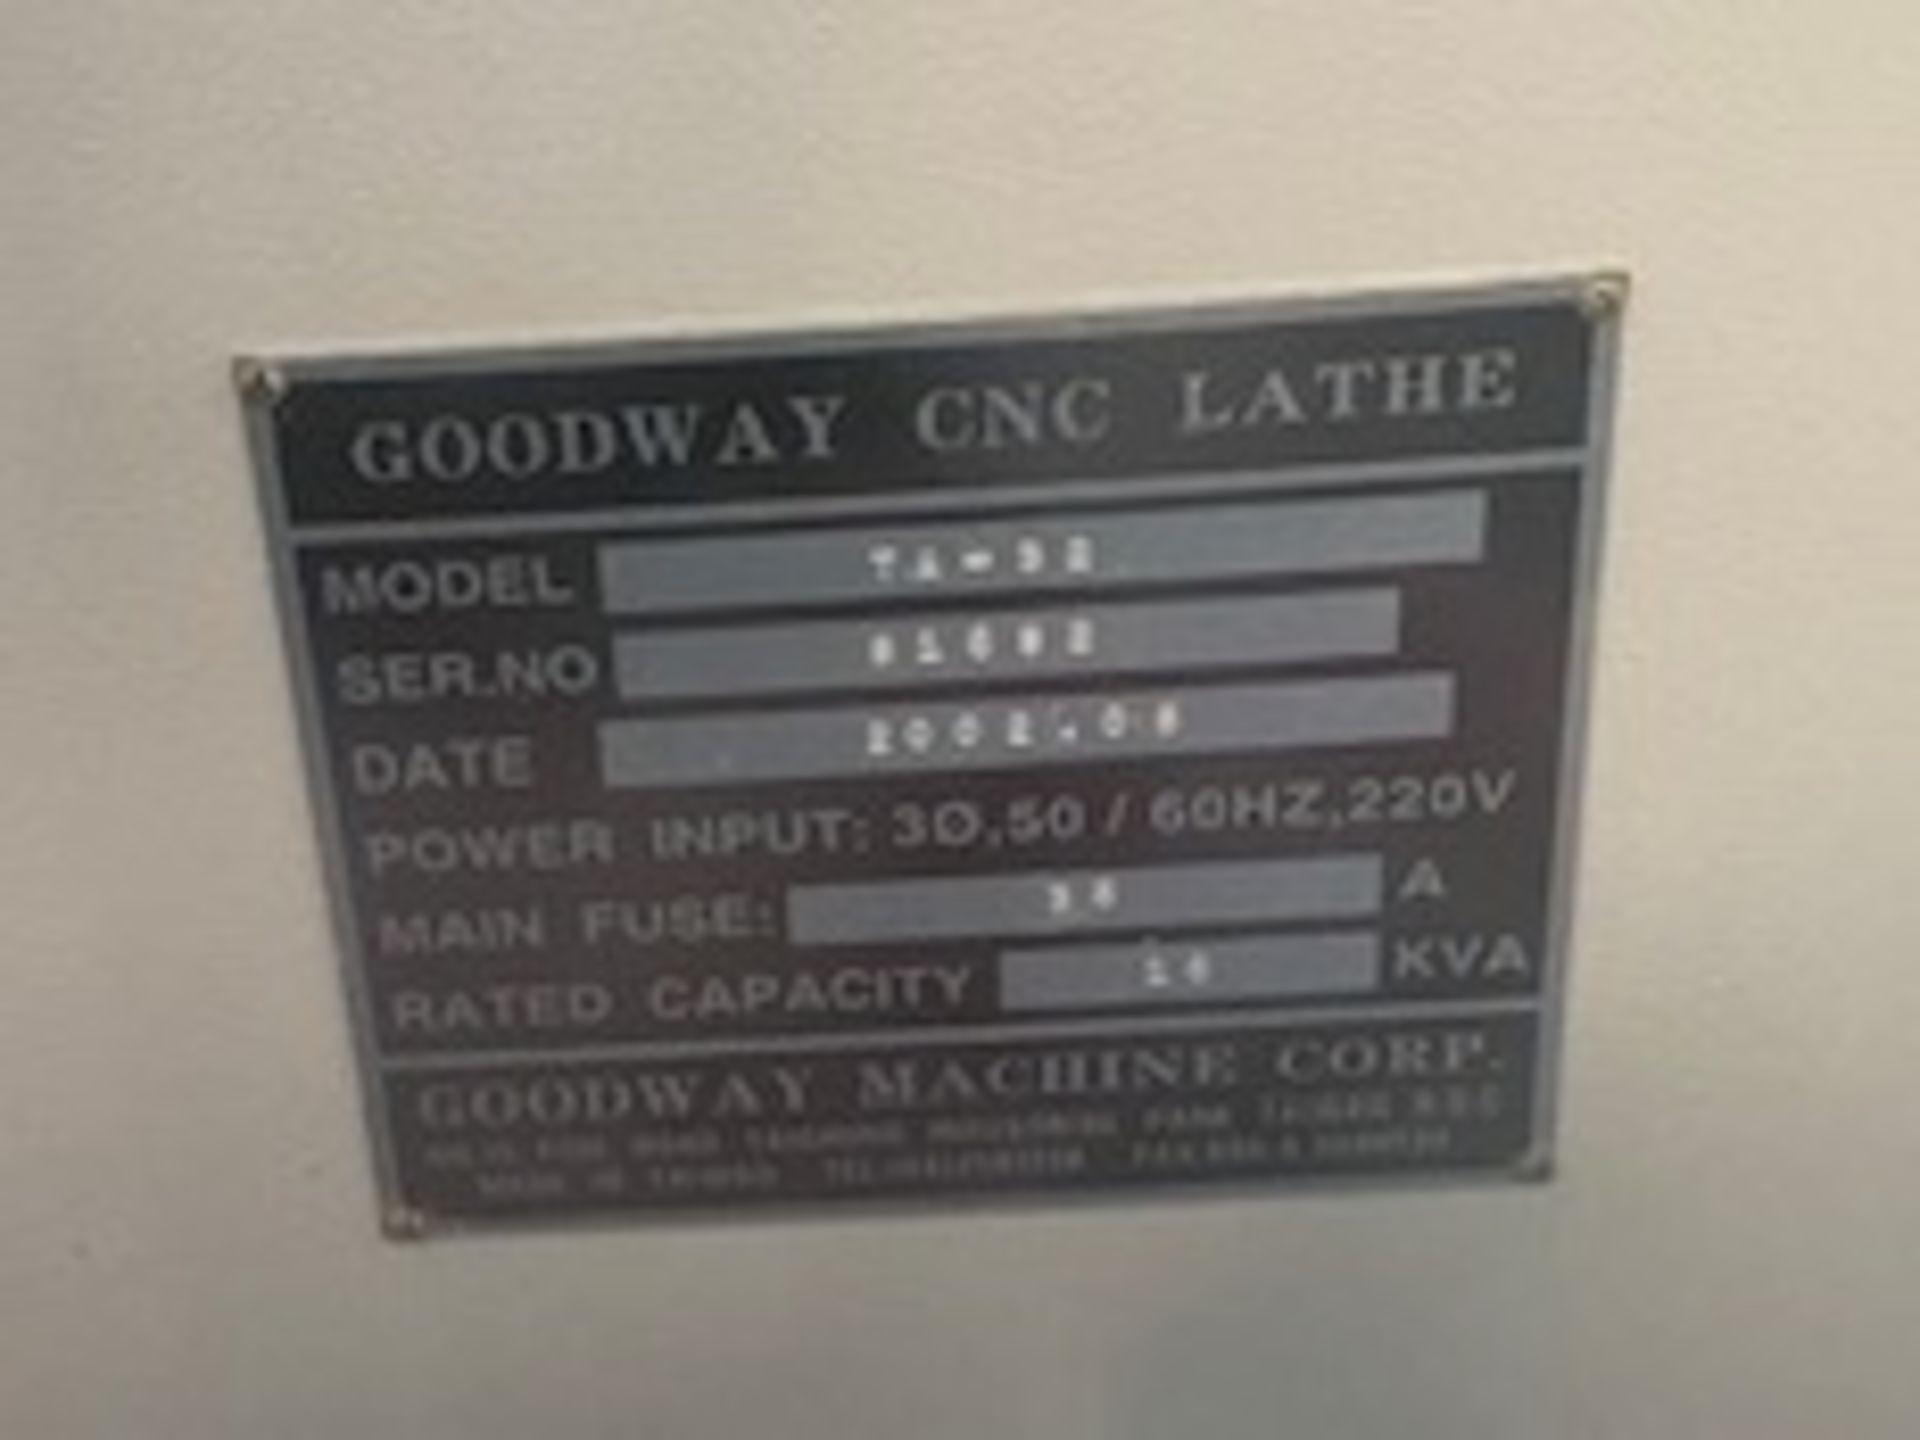 Goodway TA-32 CNC Lathe (2002) Serial Number 81692 with Goodway BF-654 Bar Feed (Location: Earls - Bild 8 aus 10